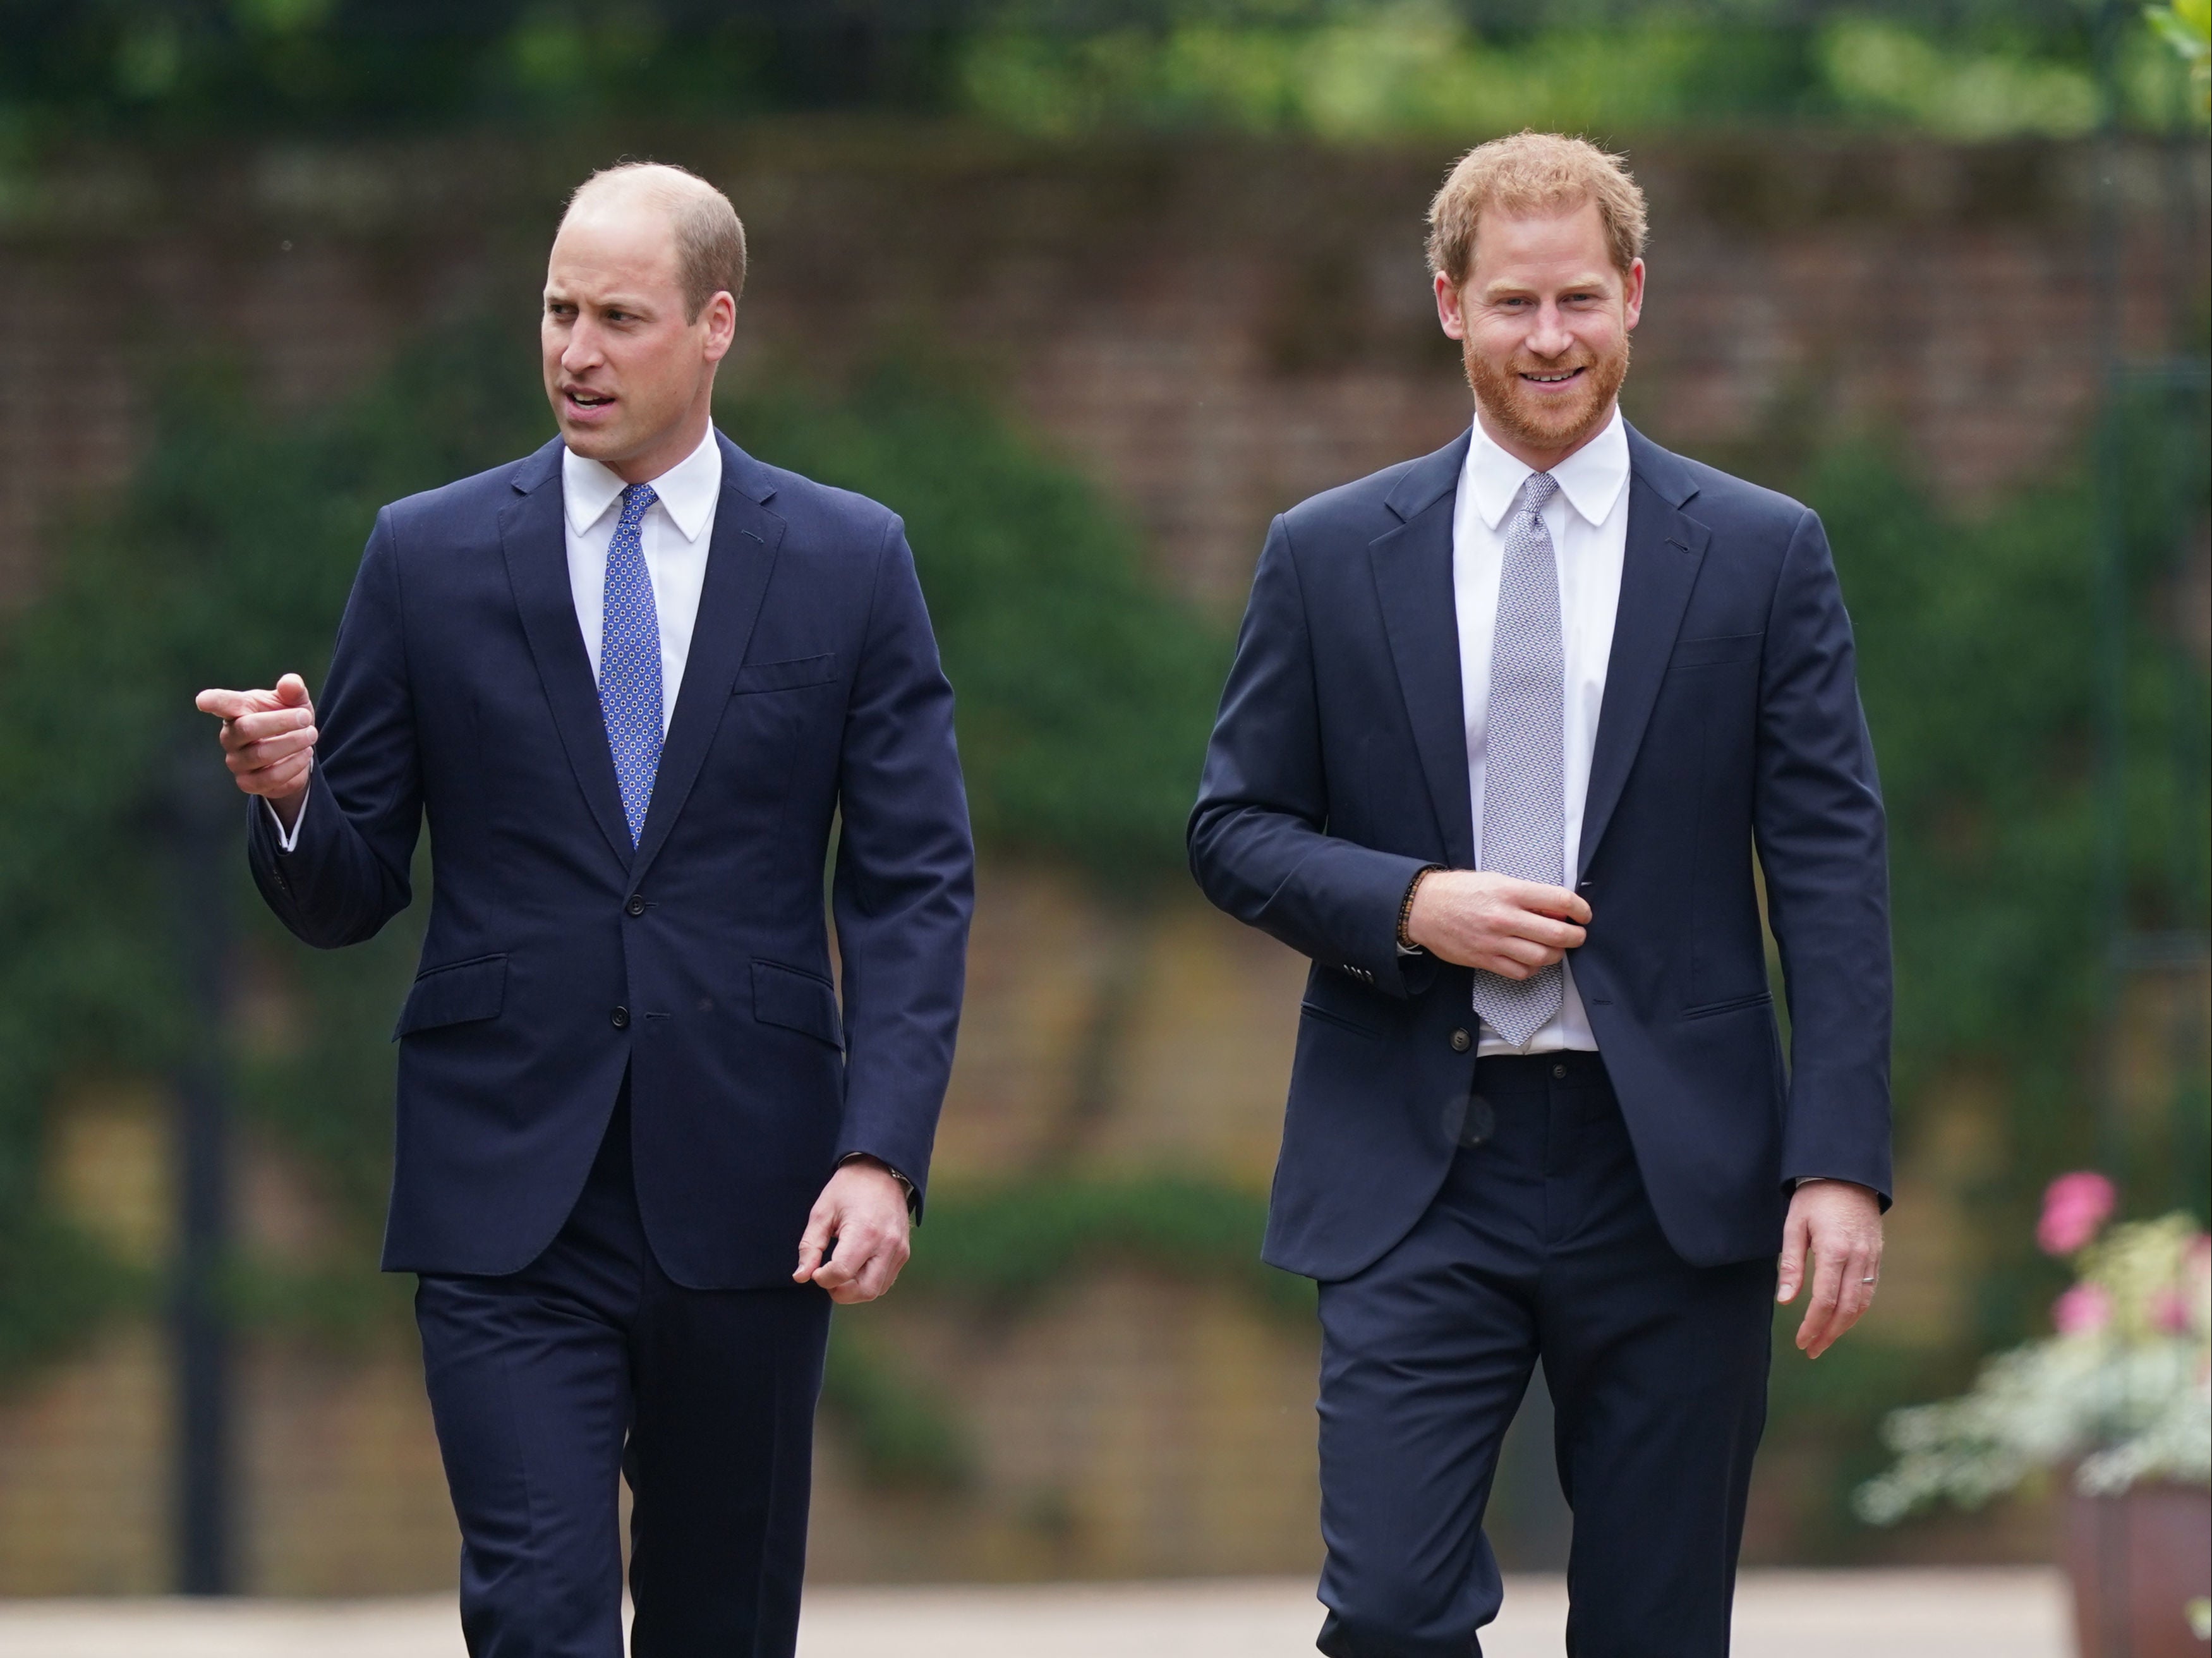 The Duke of Cambridge and Duke of Sussex arrive for the unveiling of the statue